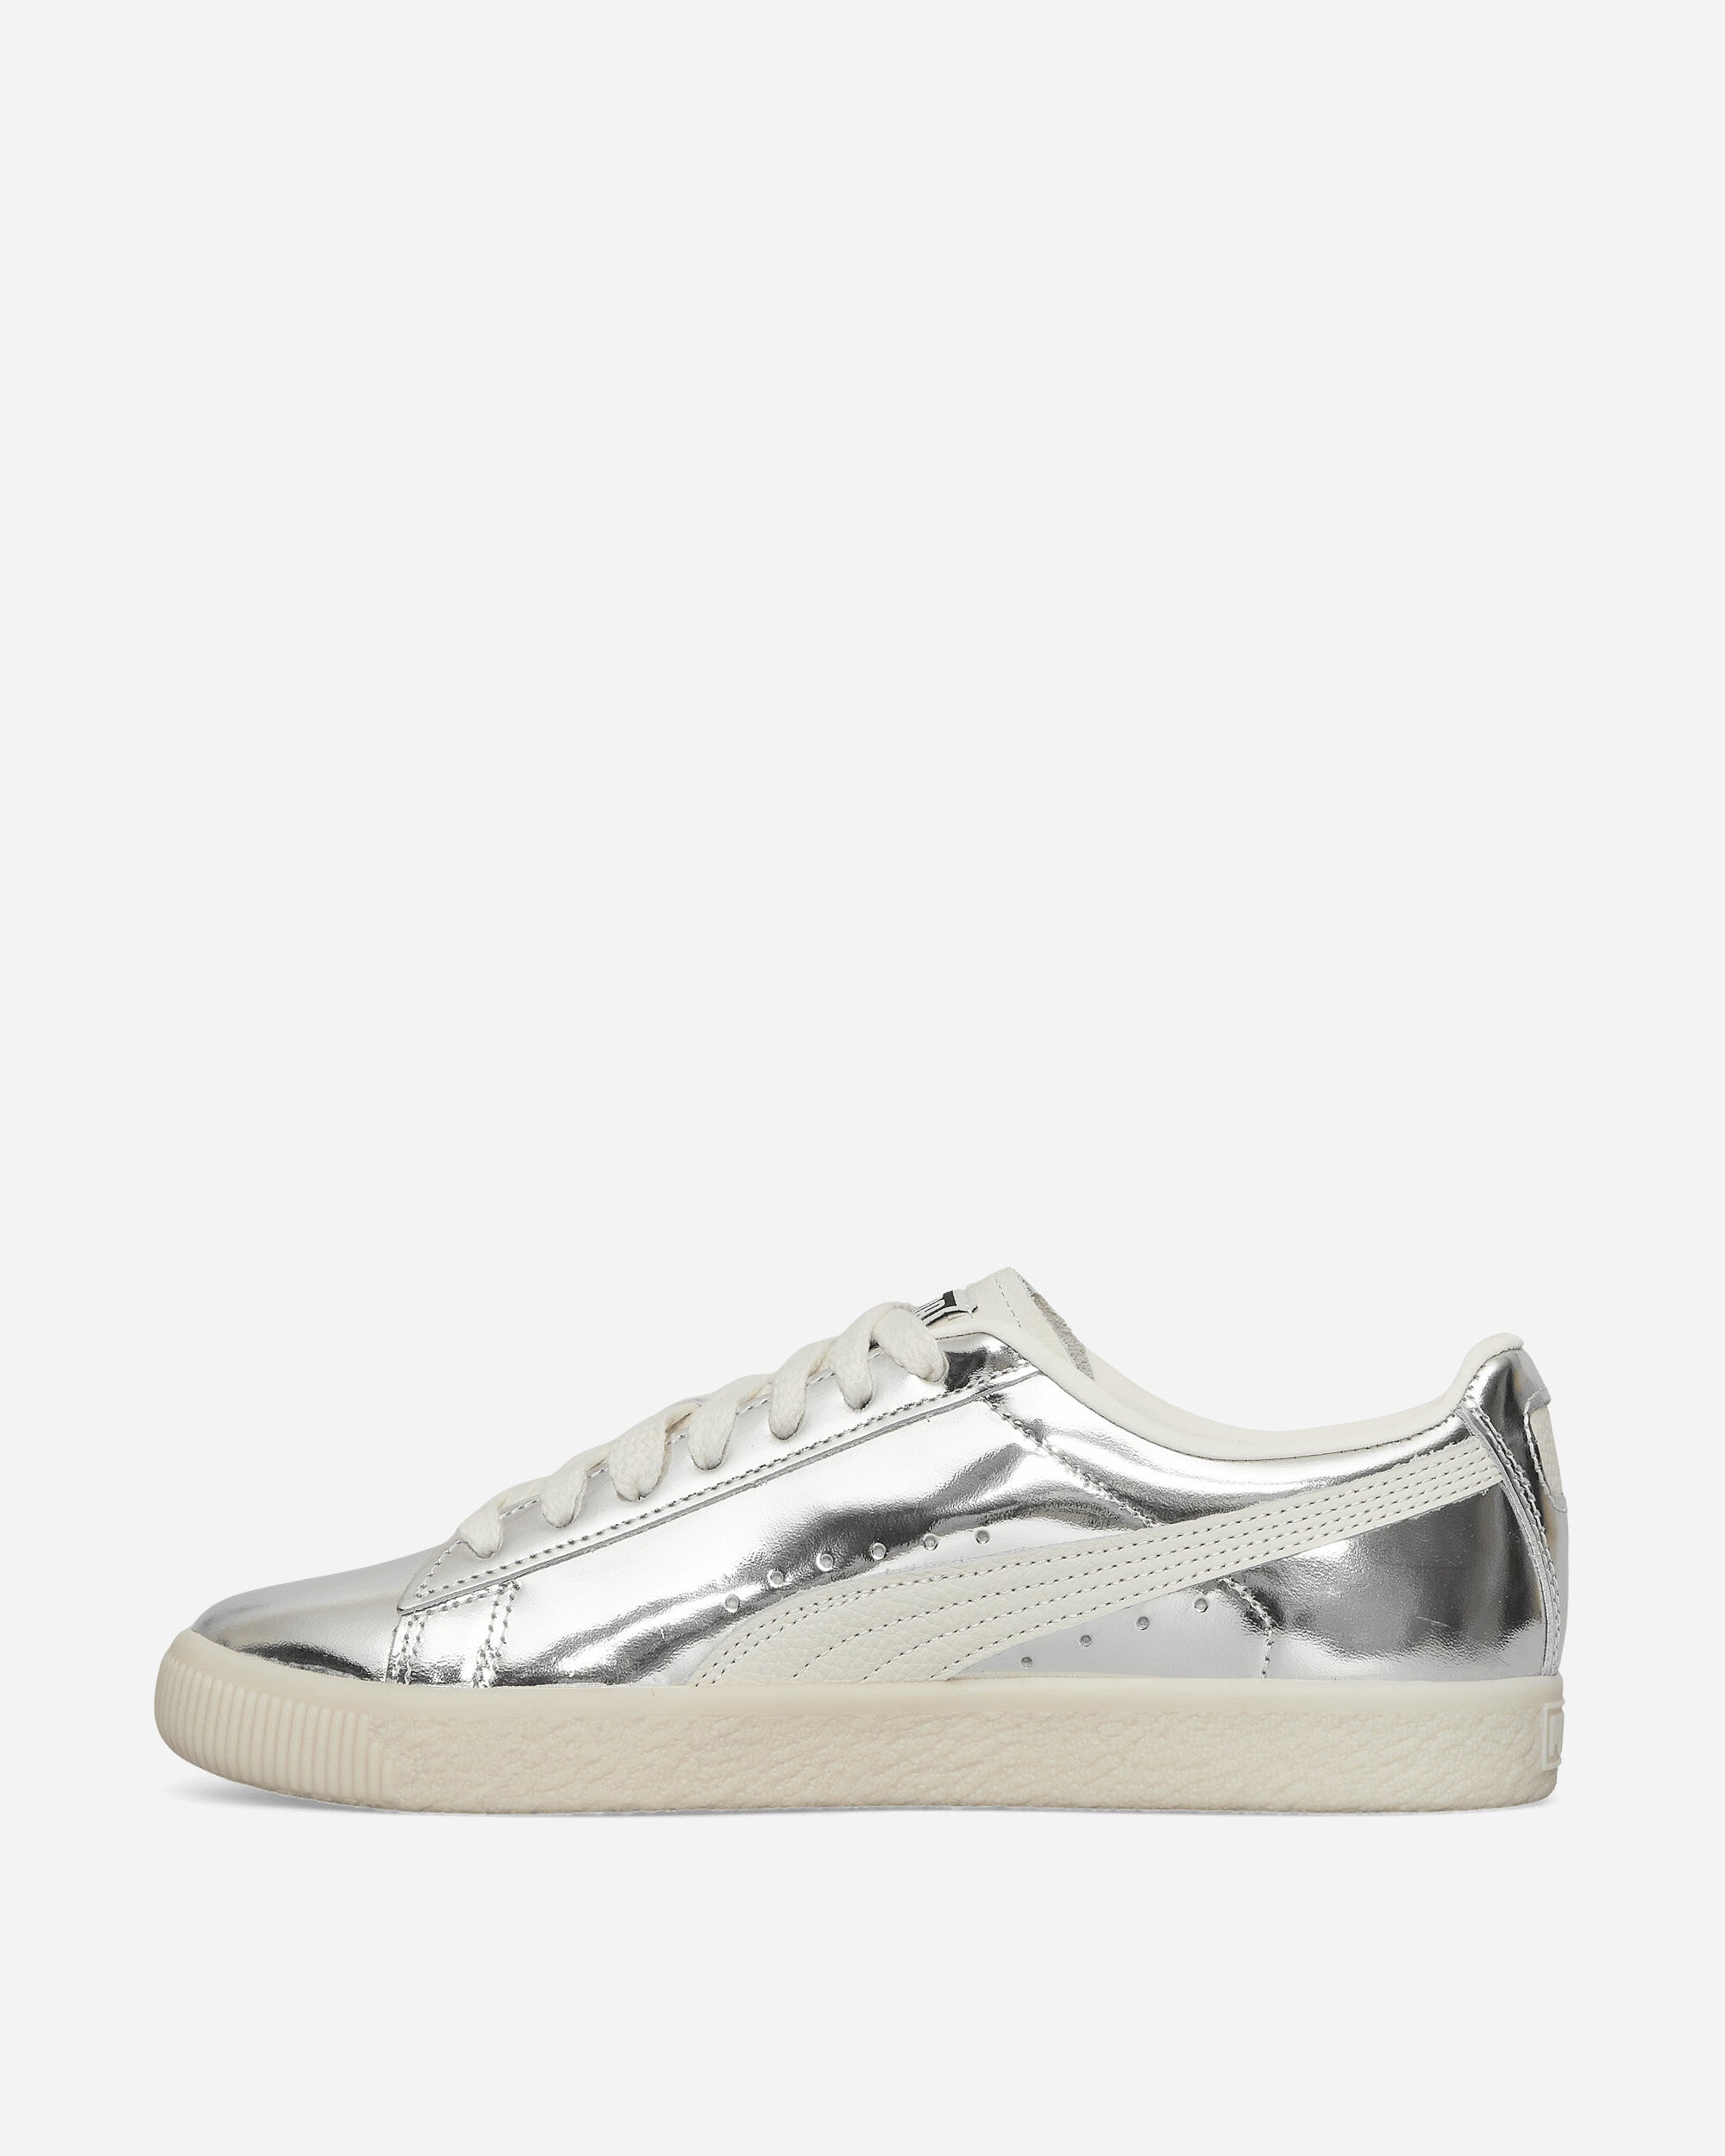 Puma Clyde 3024 Puma Silver/Warm White Sneakers Low 396488-01